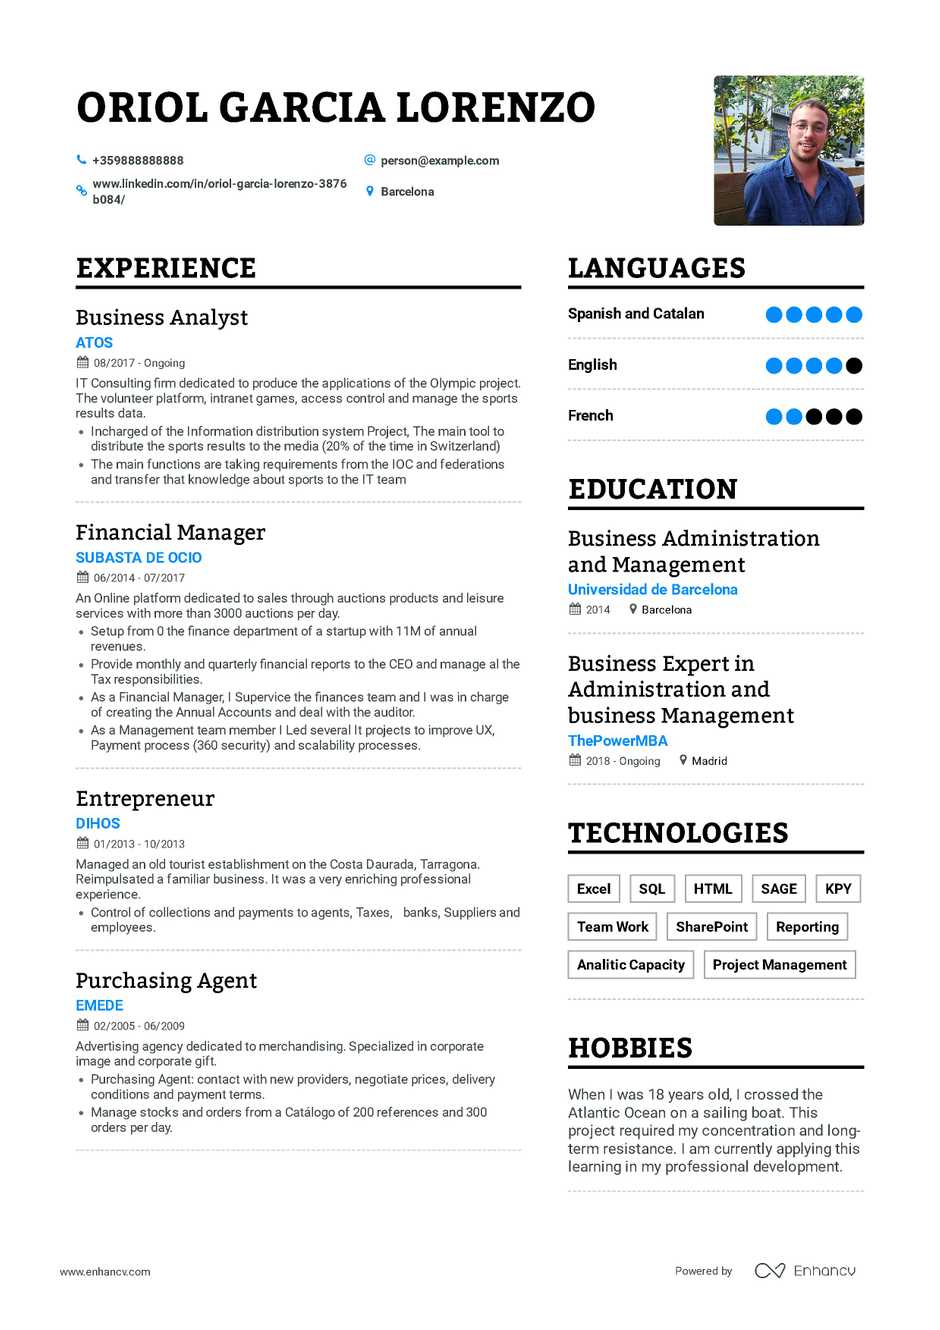 Professional Resume Examples Business Analyst Resume professional resume examples|wikiresume.com